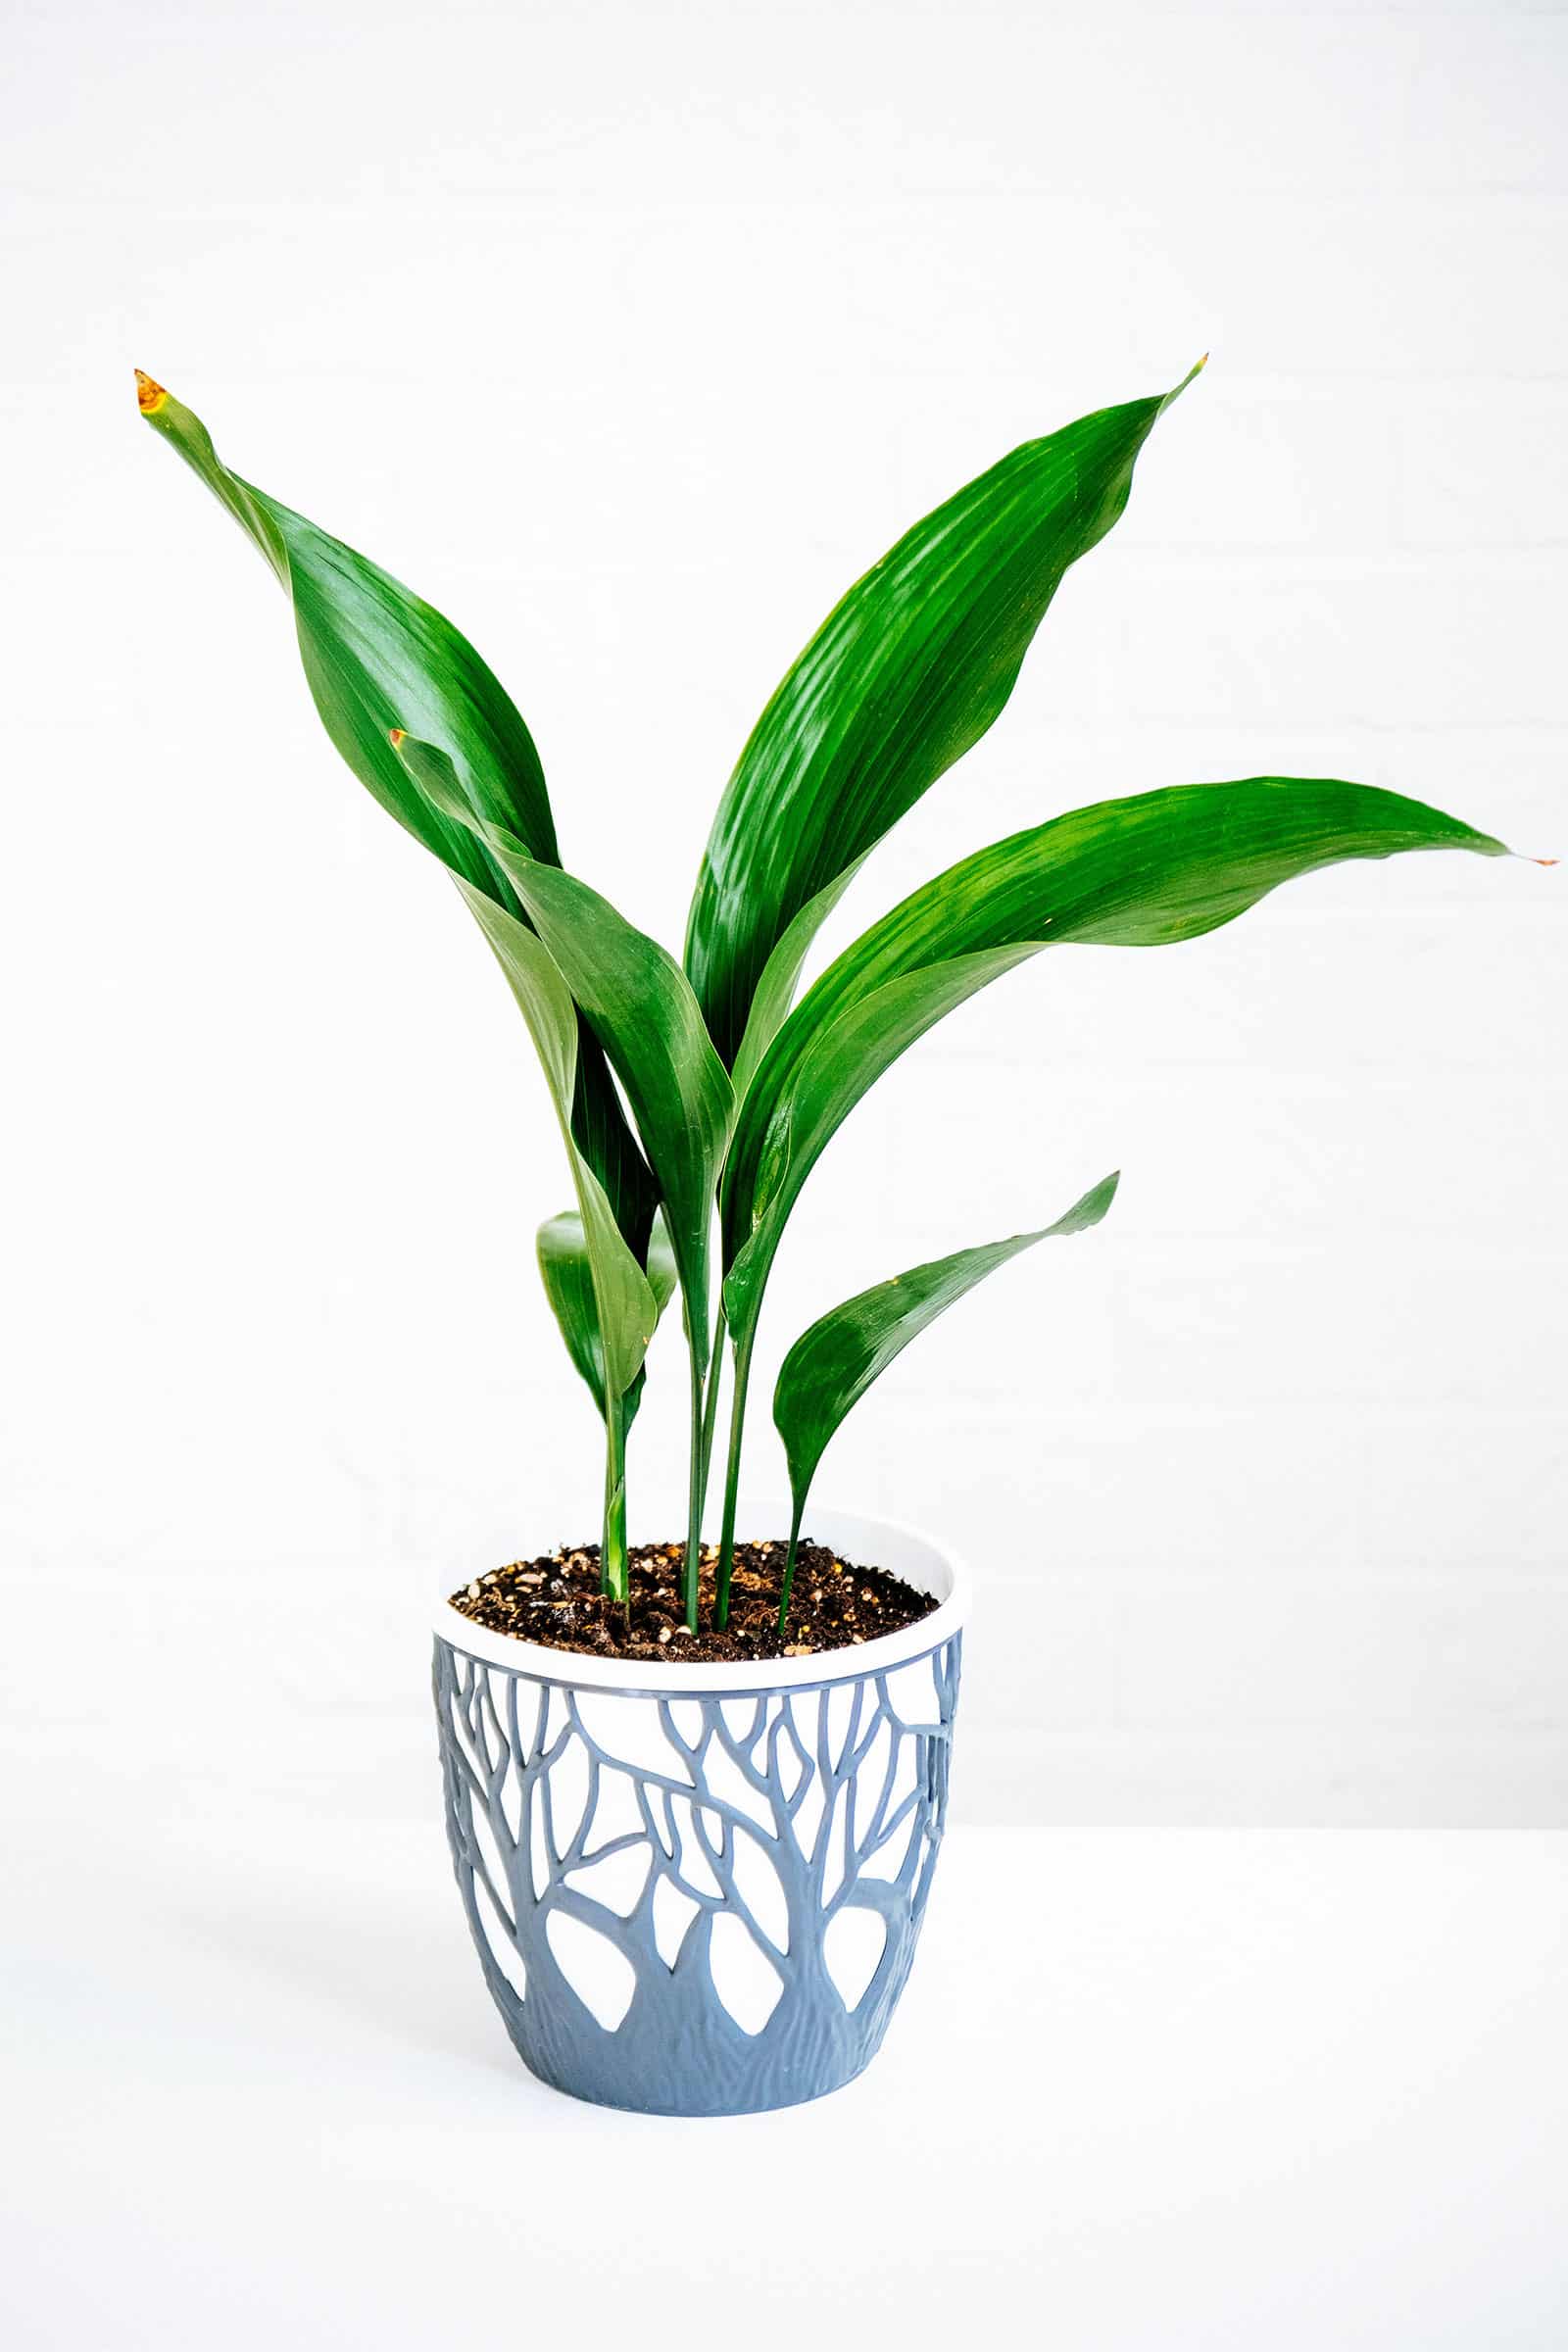 Cast iron plant in a decorative blue and white ceramic pot, shot on a white background